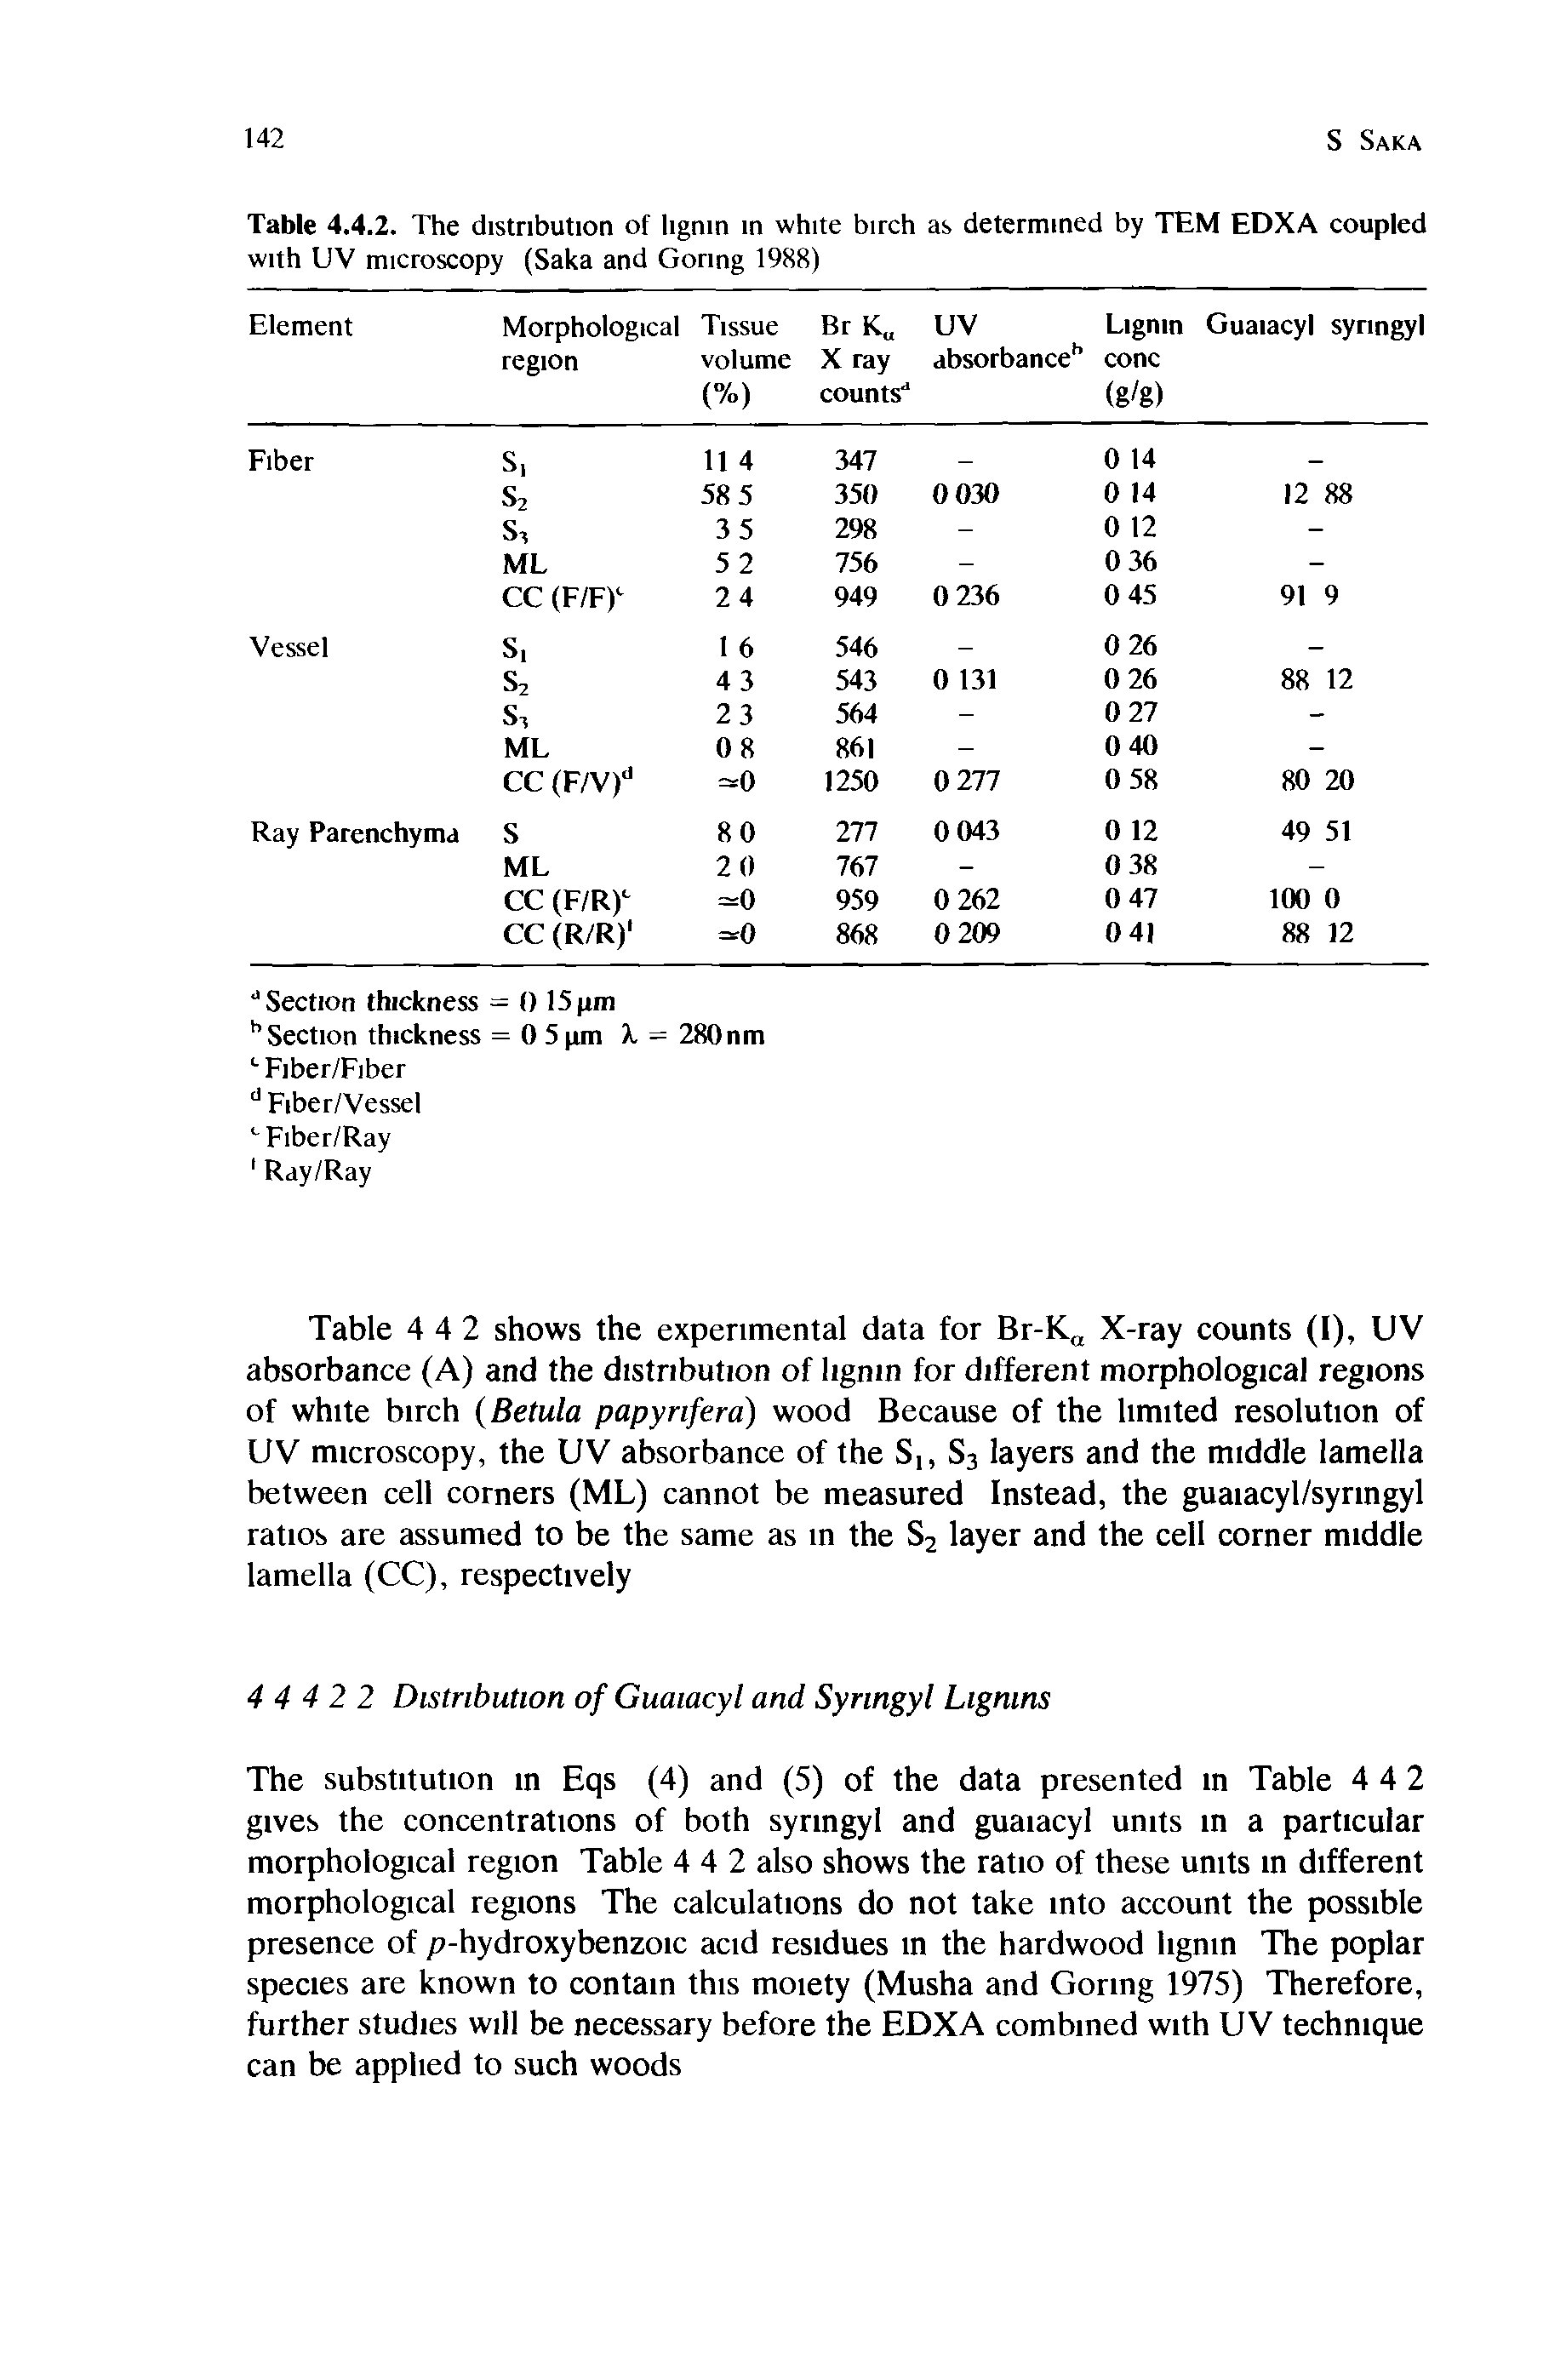 Table 4.4.2. The distribution of lignin in white birch as determined by TEM EDXA coupled with UV microscopy (Saka and Goring 1988)...